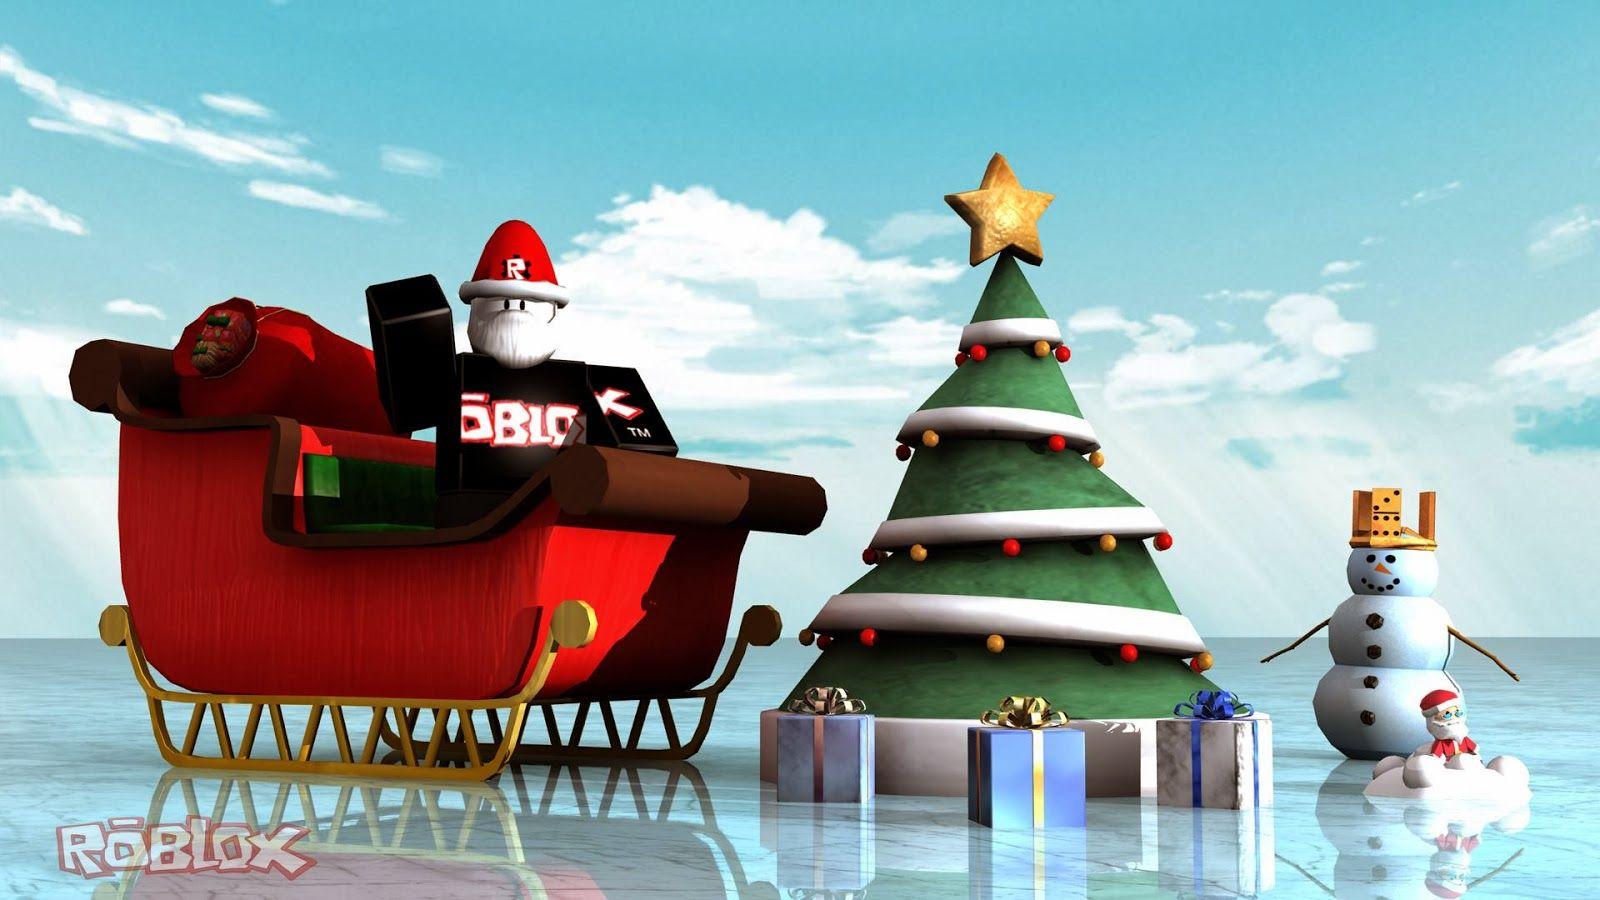 Christmas Roblox Wallpapers Top Free Christmas Roblox Backgrounds Wallpaperaccess - roblox christmas background roblox